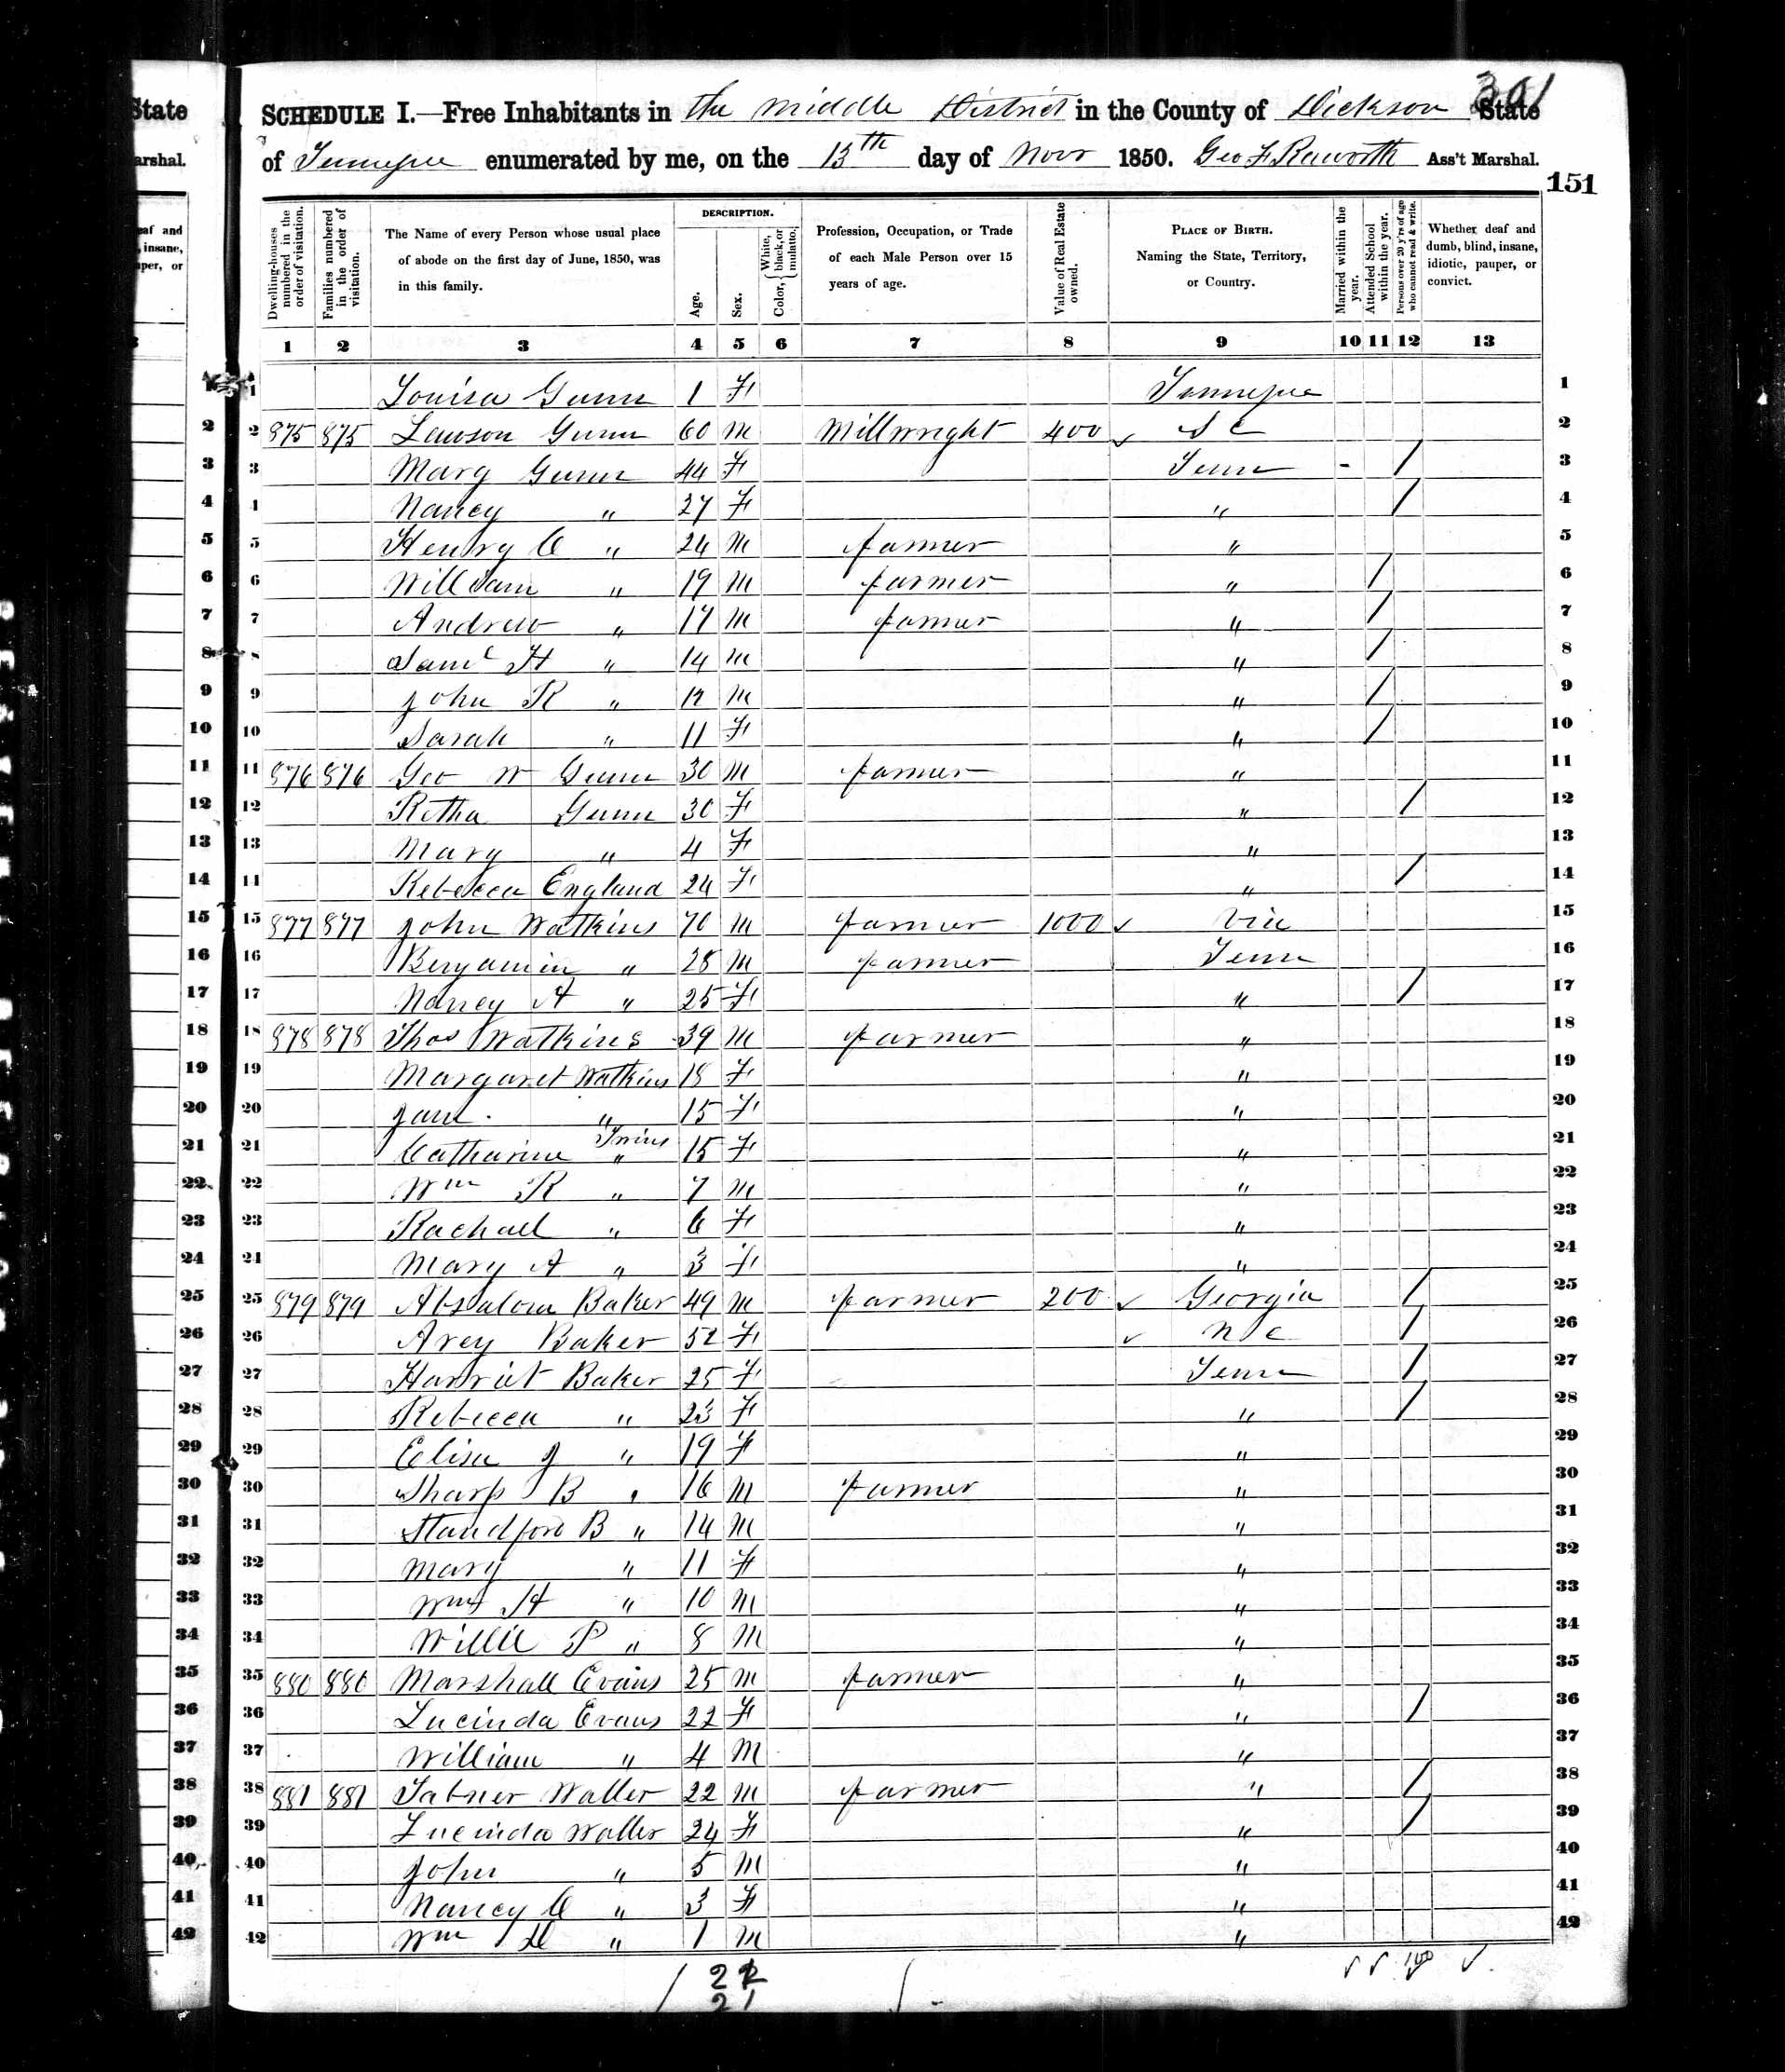 George W. Gunn and wife Retha Brazzell, 1850 Dickson County, Tennessee, census